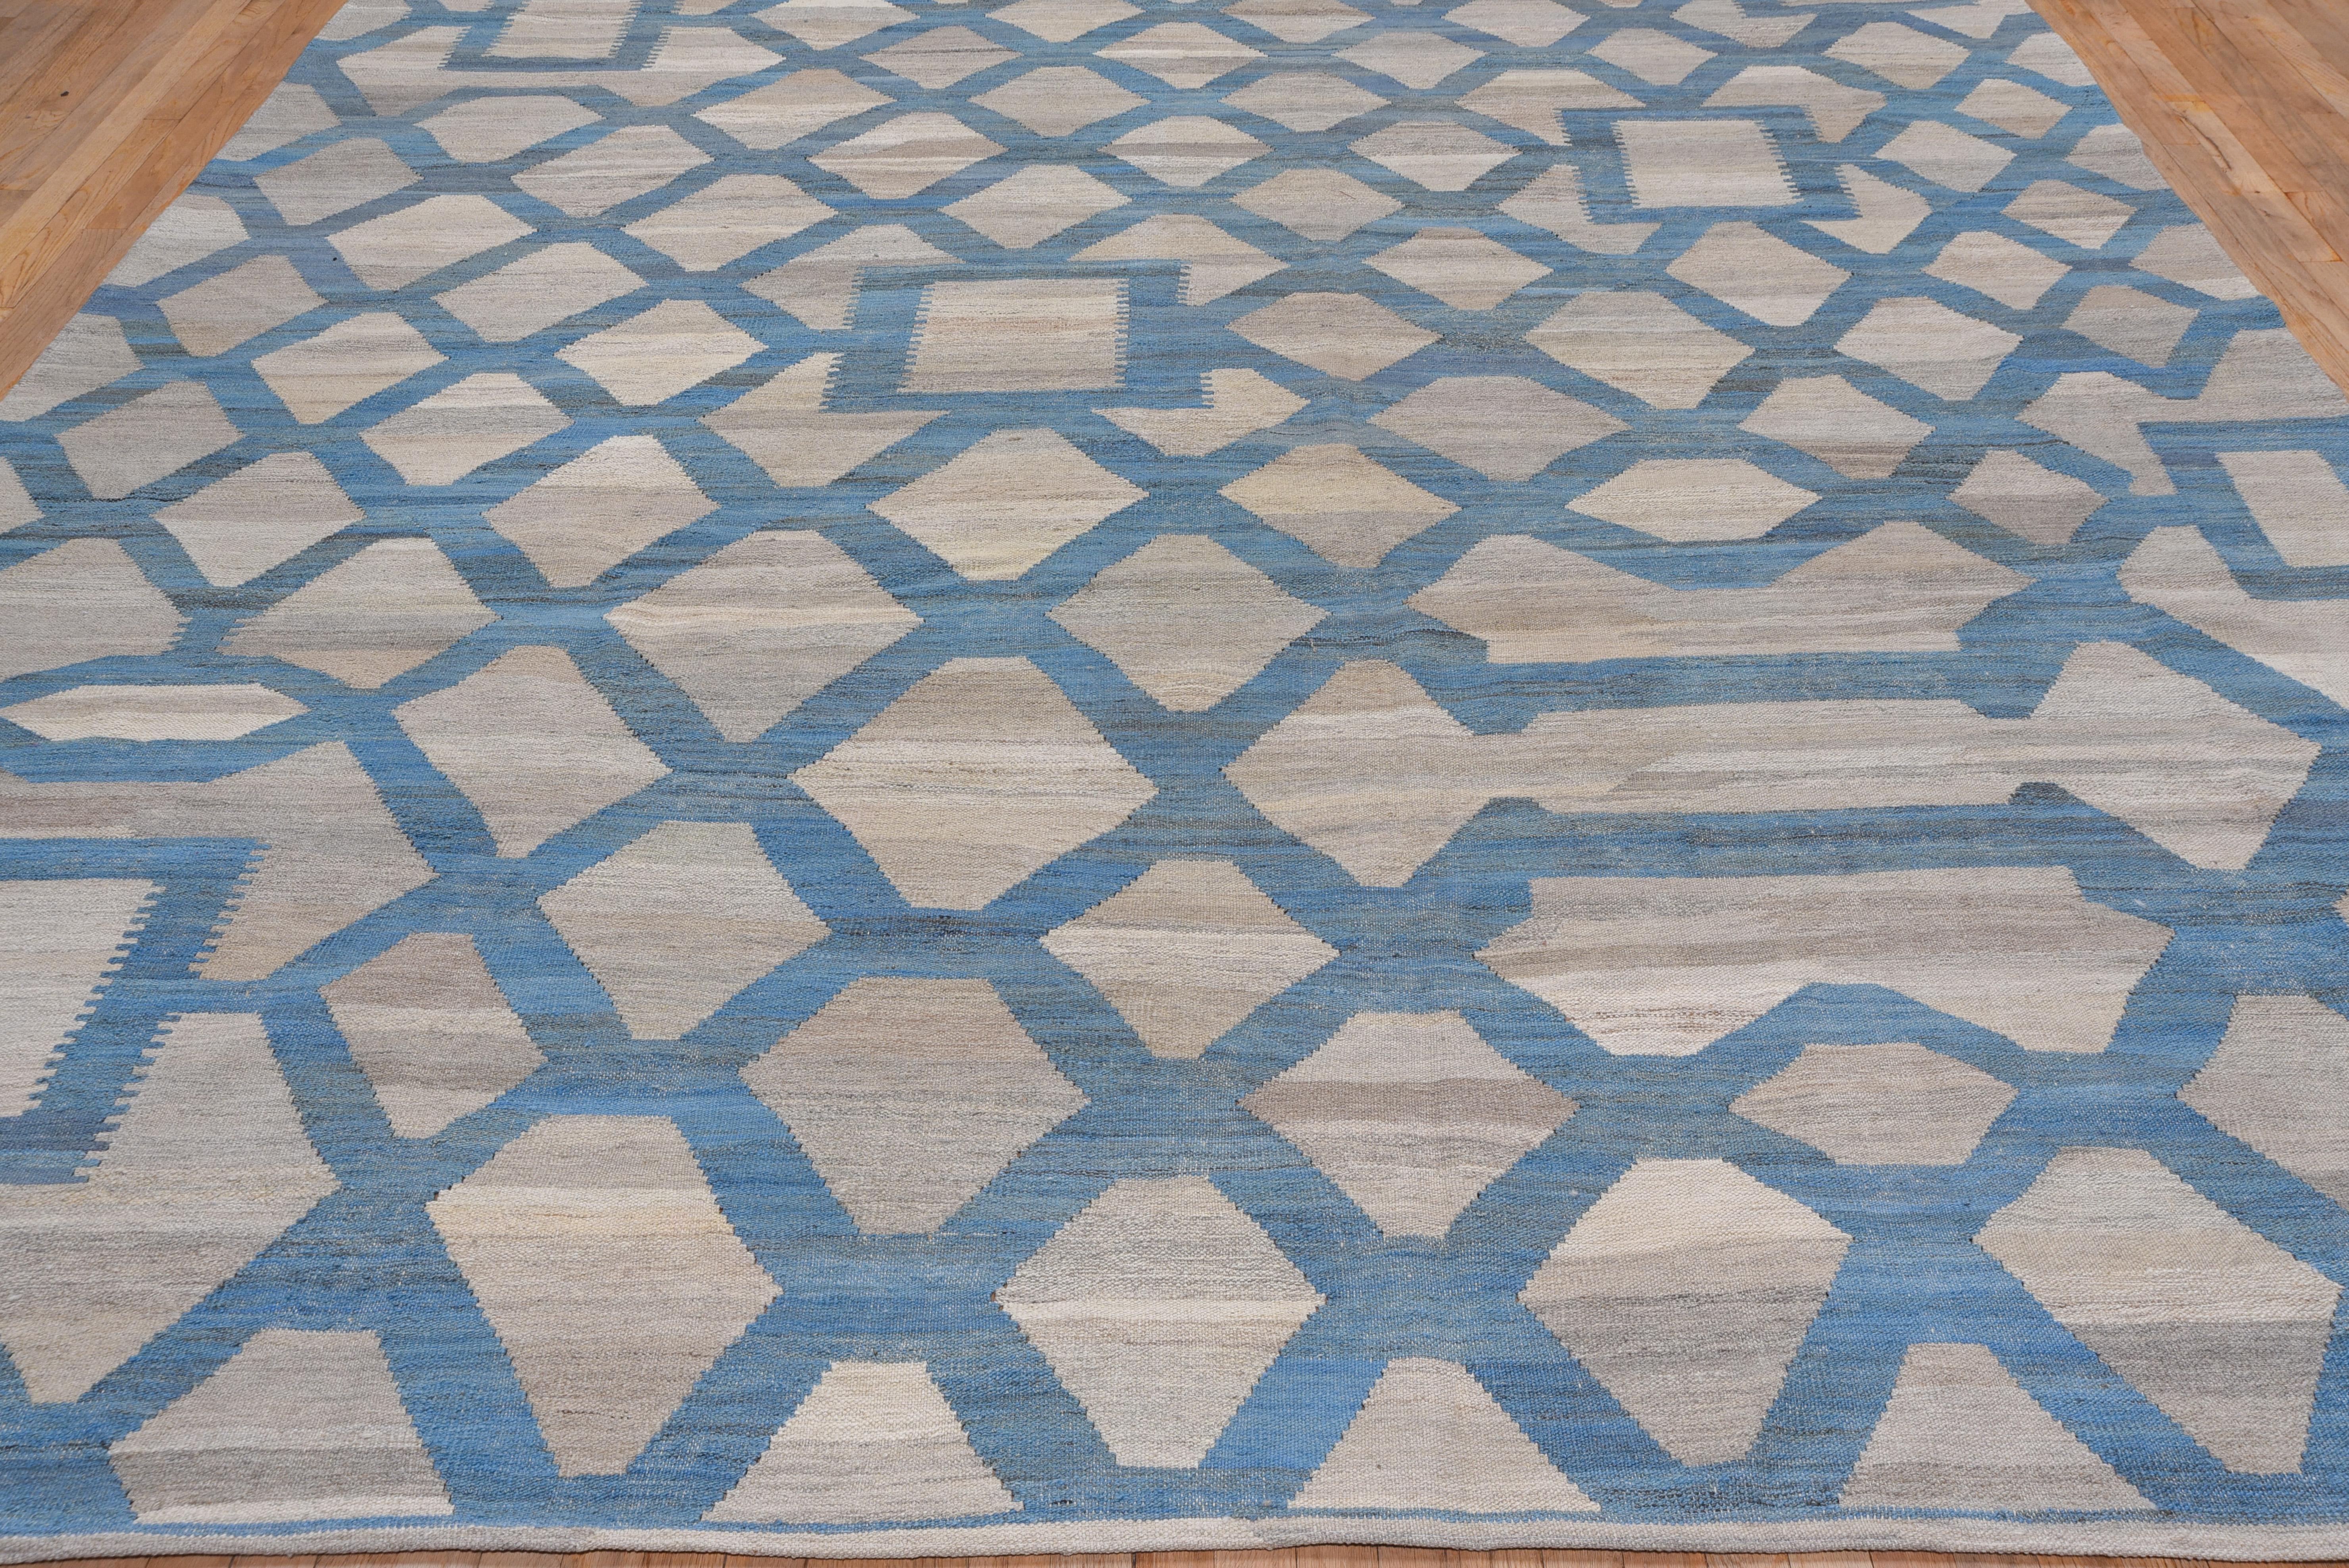 Geometric & Modern Flatweave Area Rug, Soft Light Gray & Light Blue Palette In Excellent Condition For Sale In New York, NY